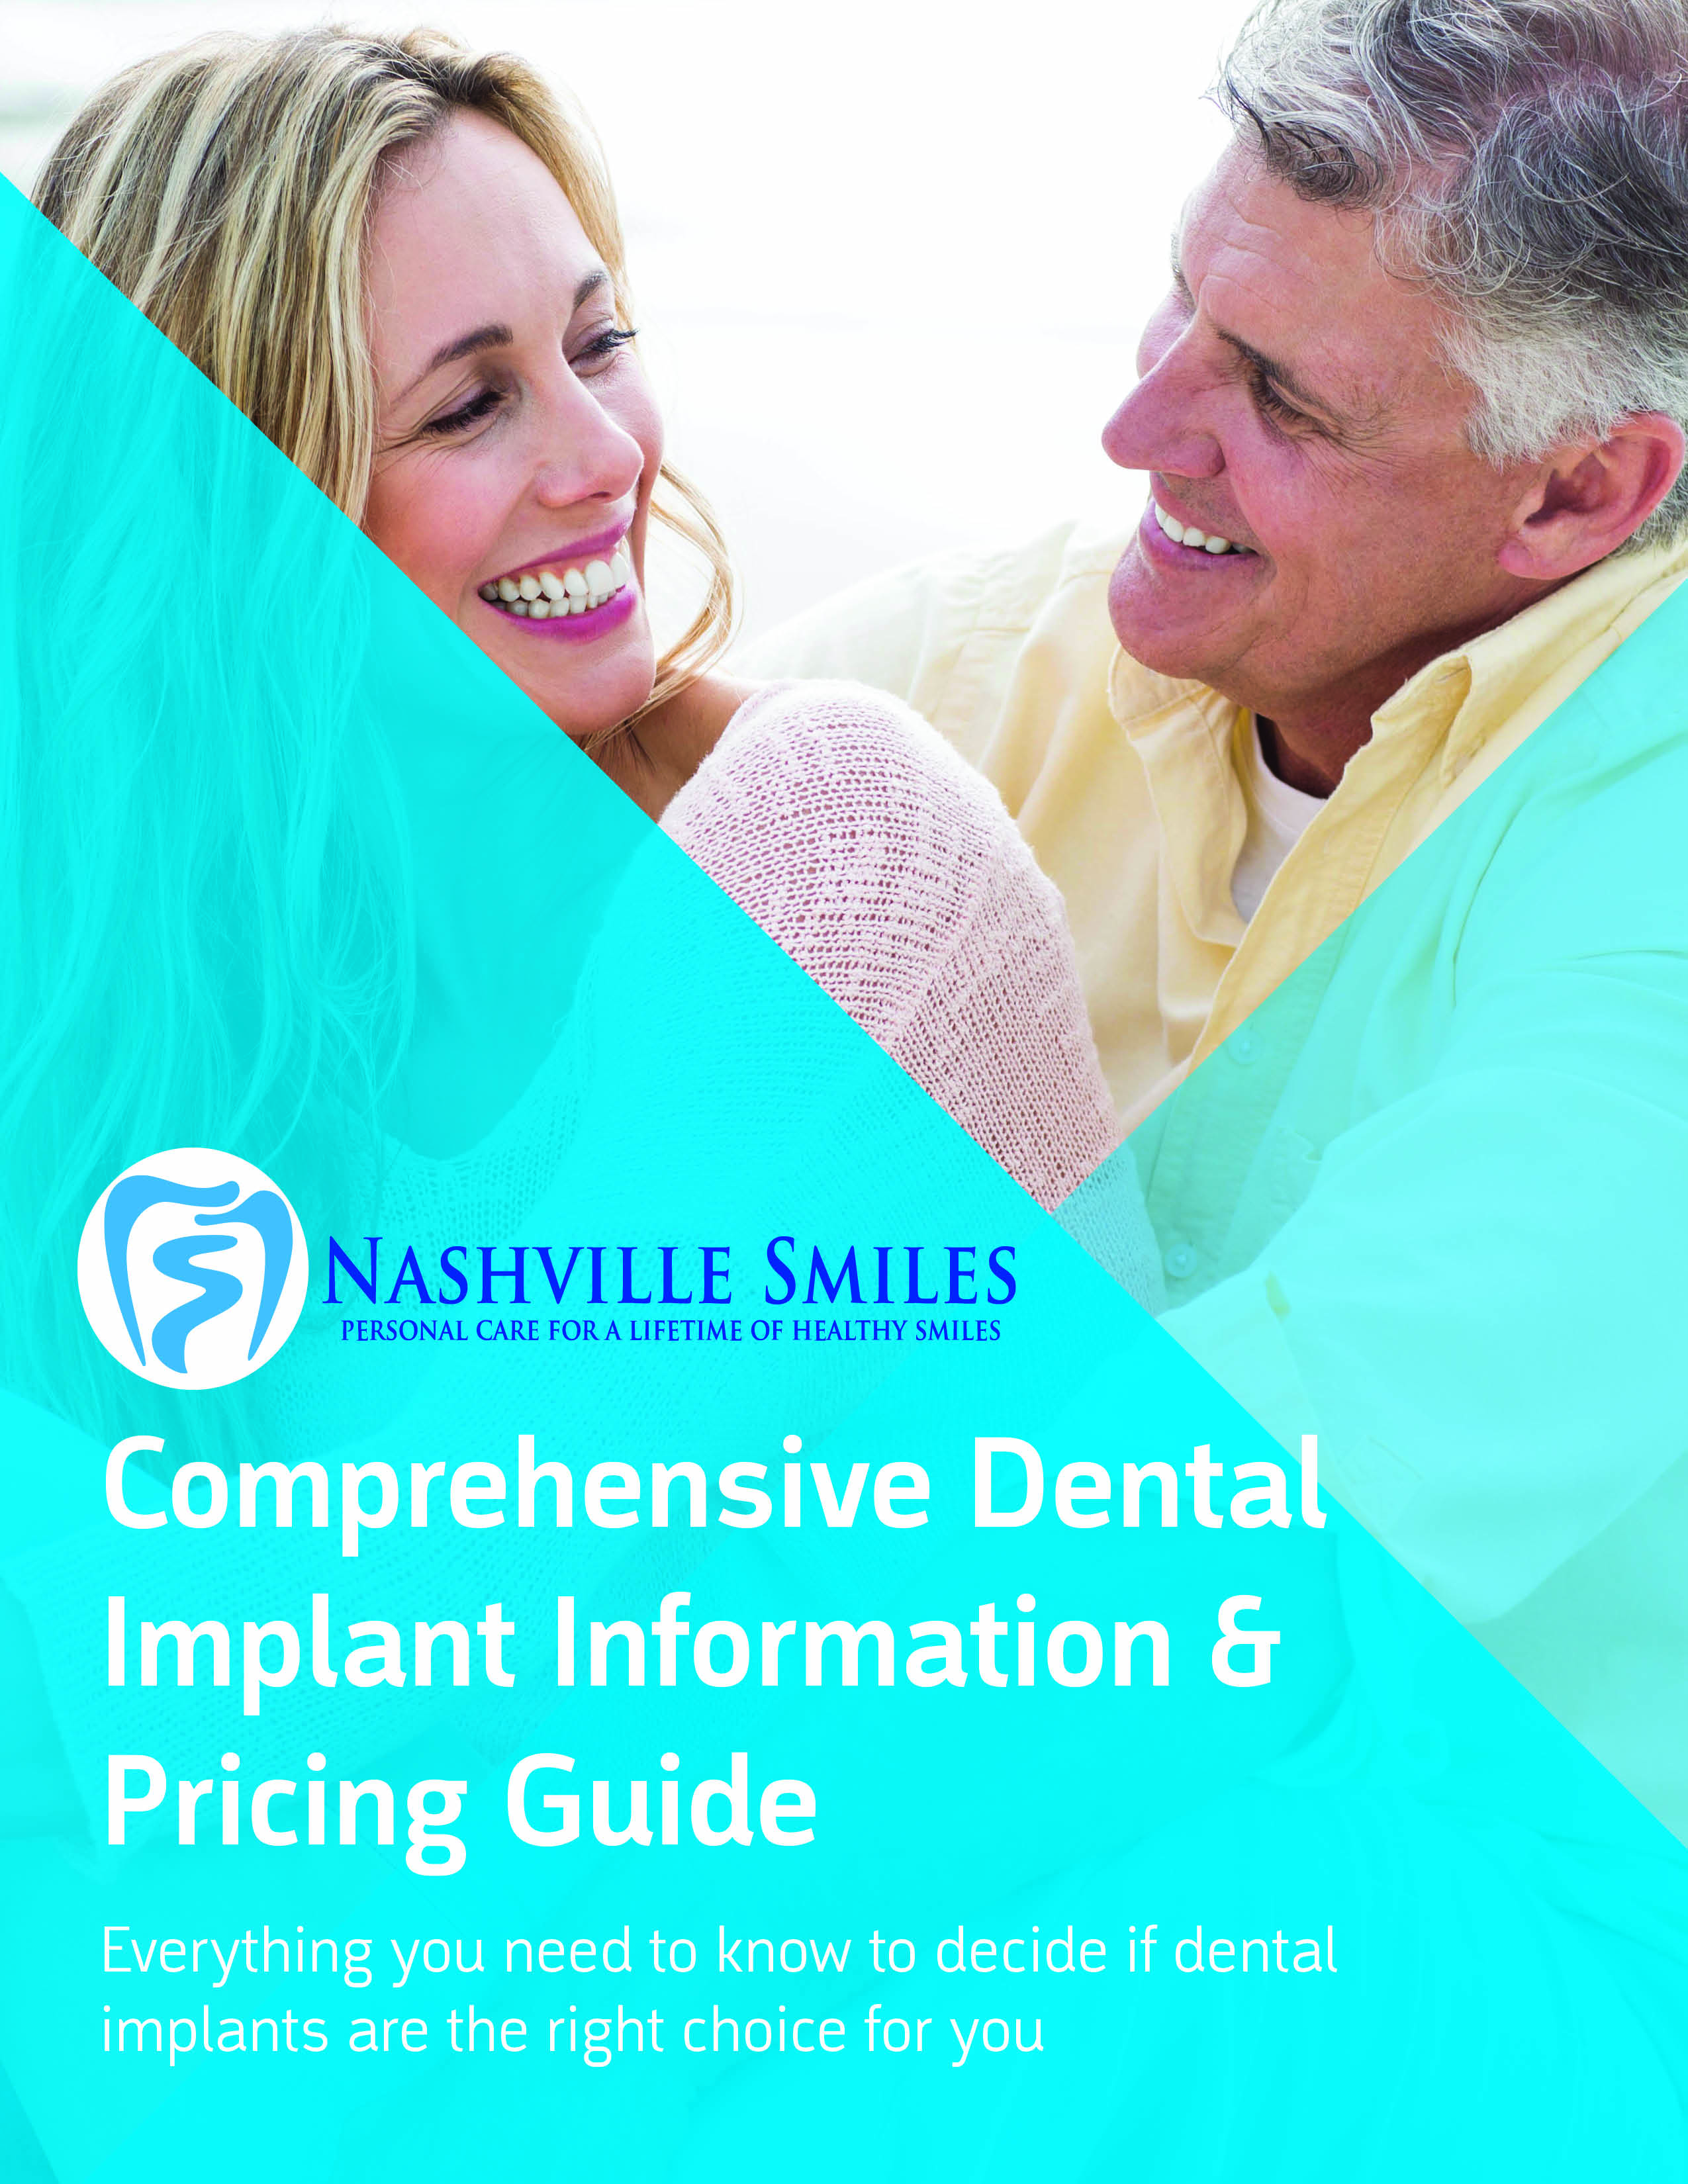 Full Dental Implant Pricing, Cost, Afford, Procedures, Informational Guide Download